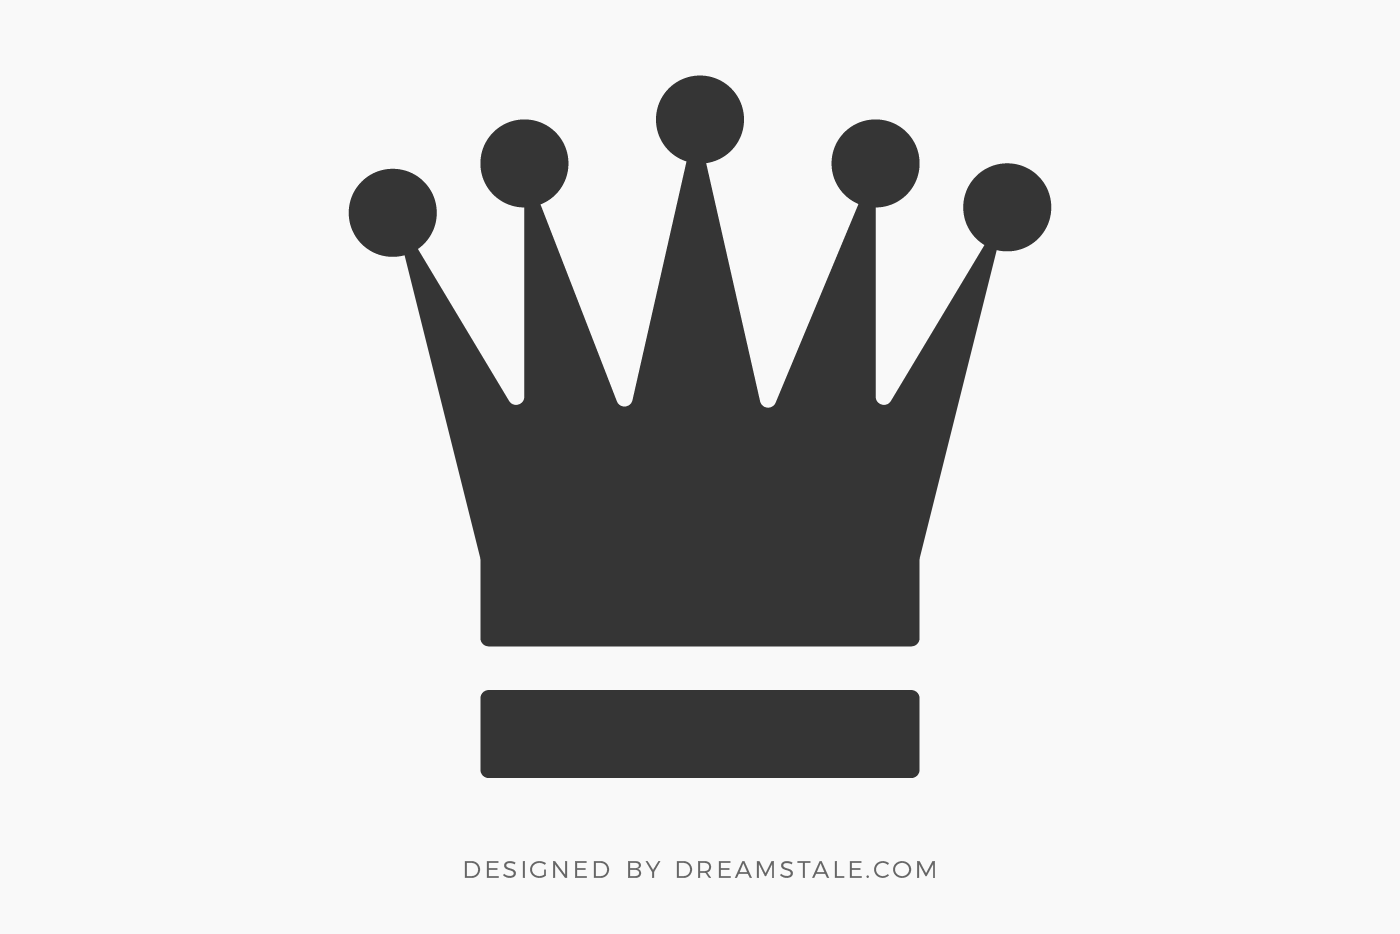 King Crown Free SVG Clipart - Dreamstale